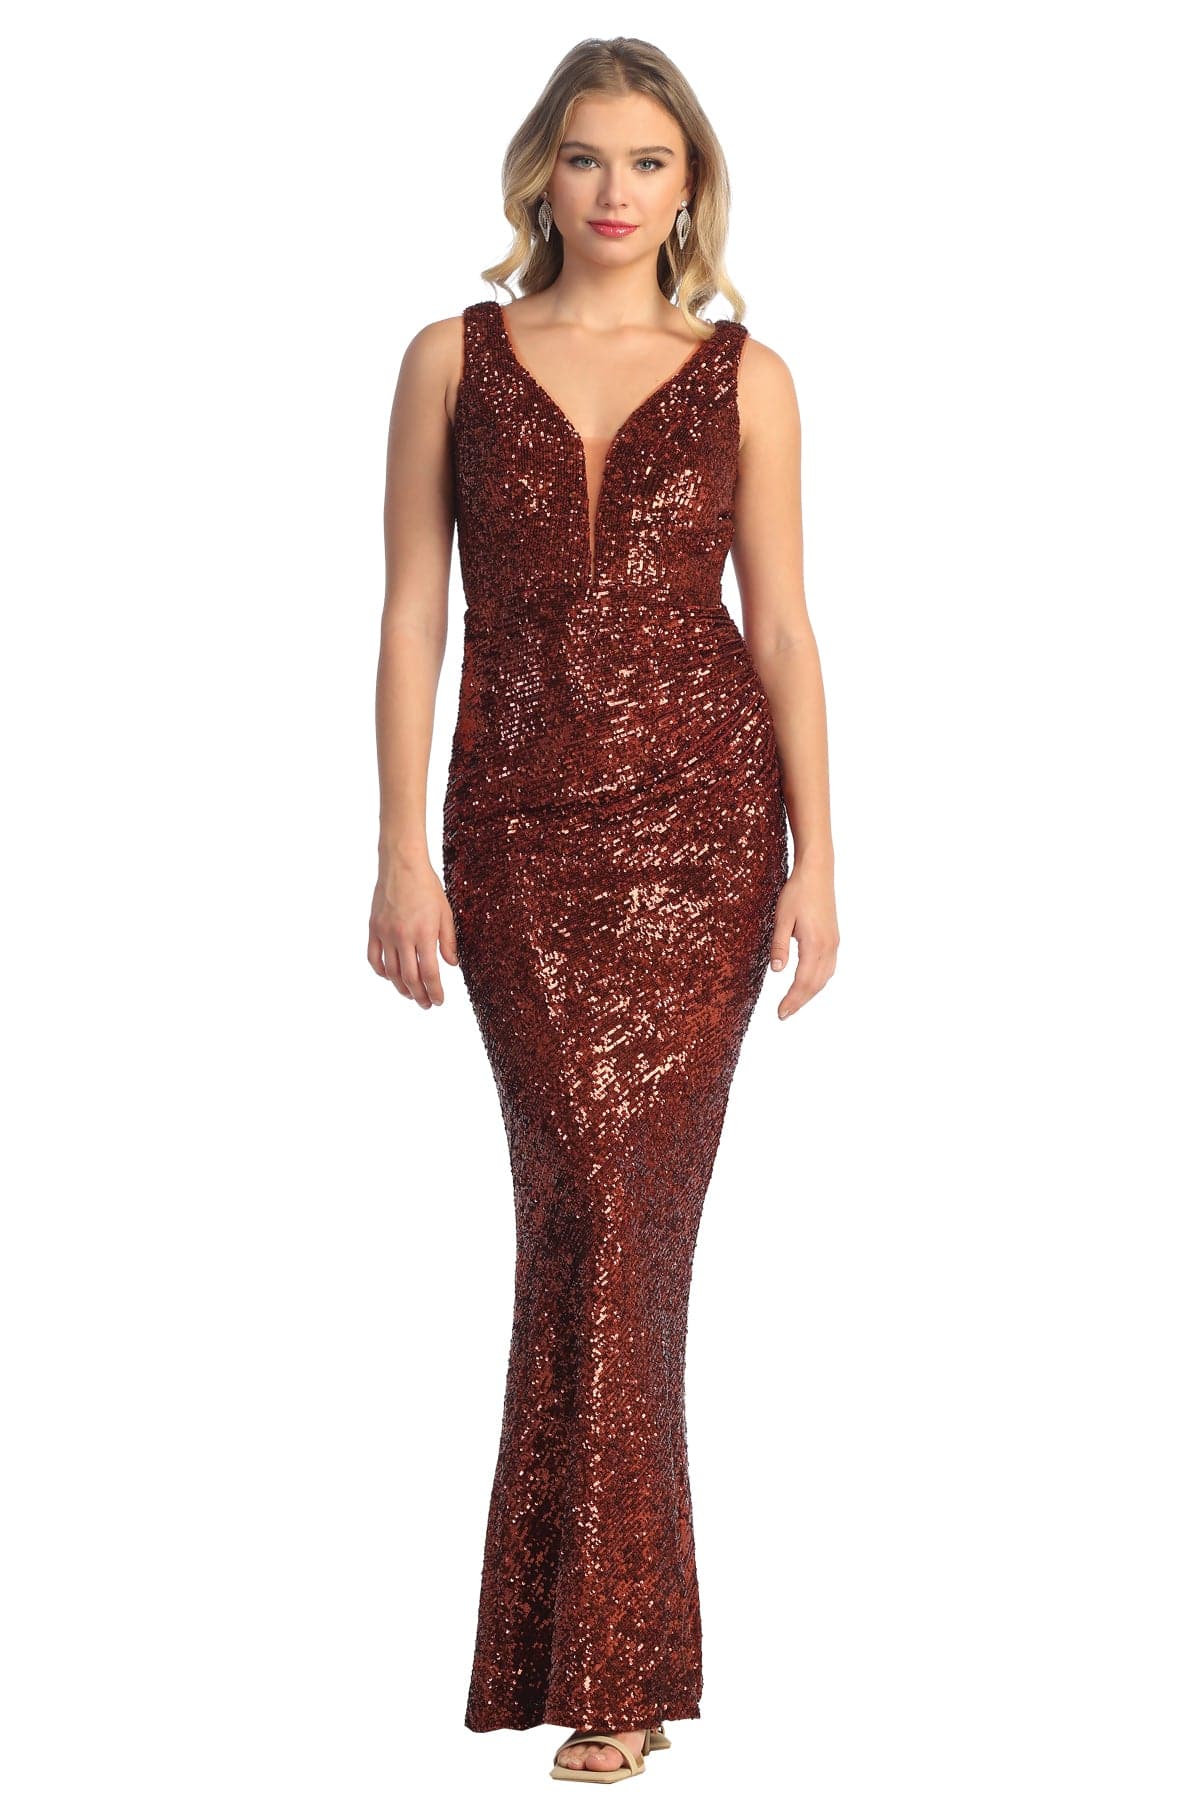 Cindy Collection 1745 Sparkling Mermaid Dress - NORMA REED